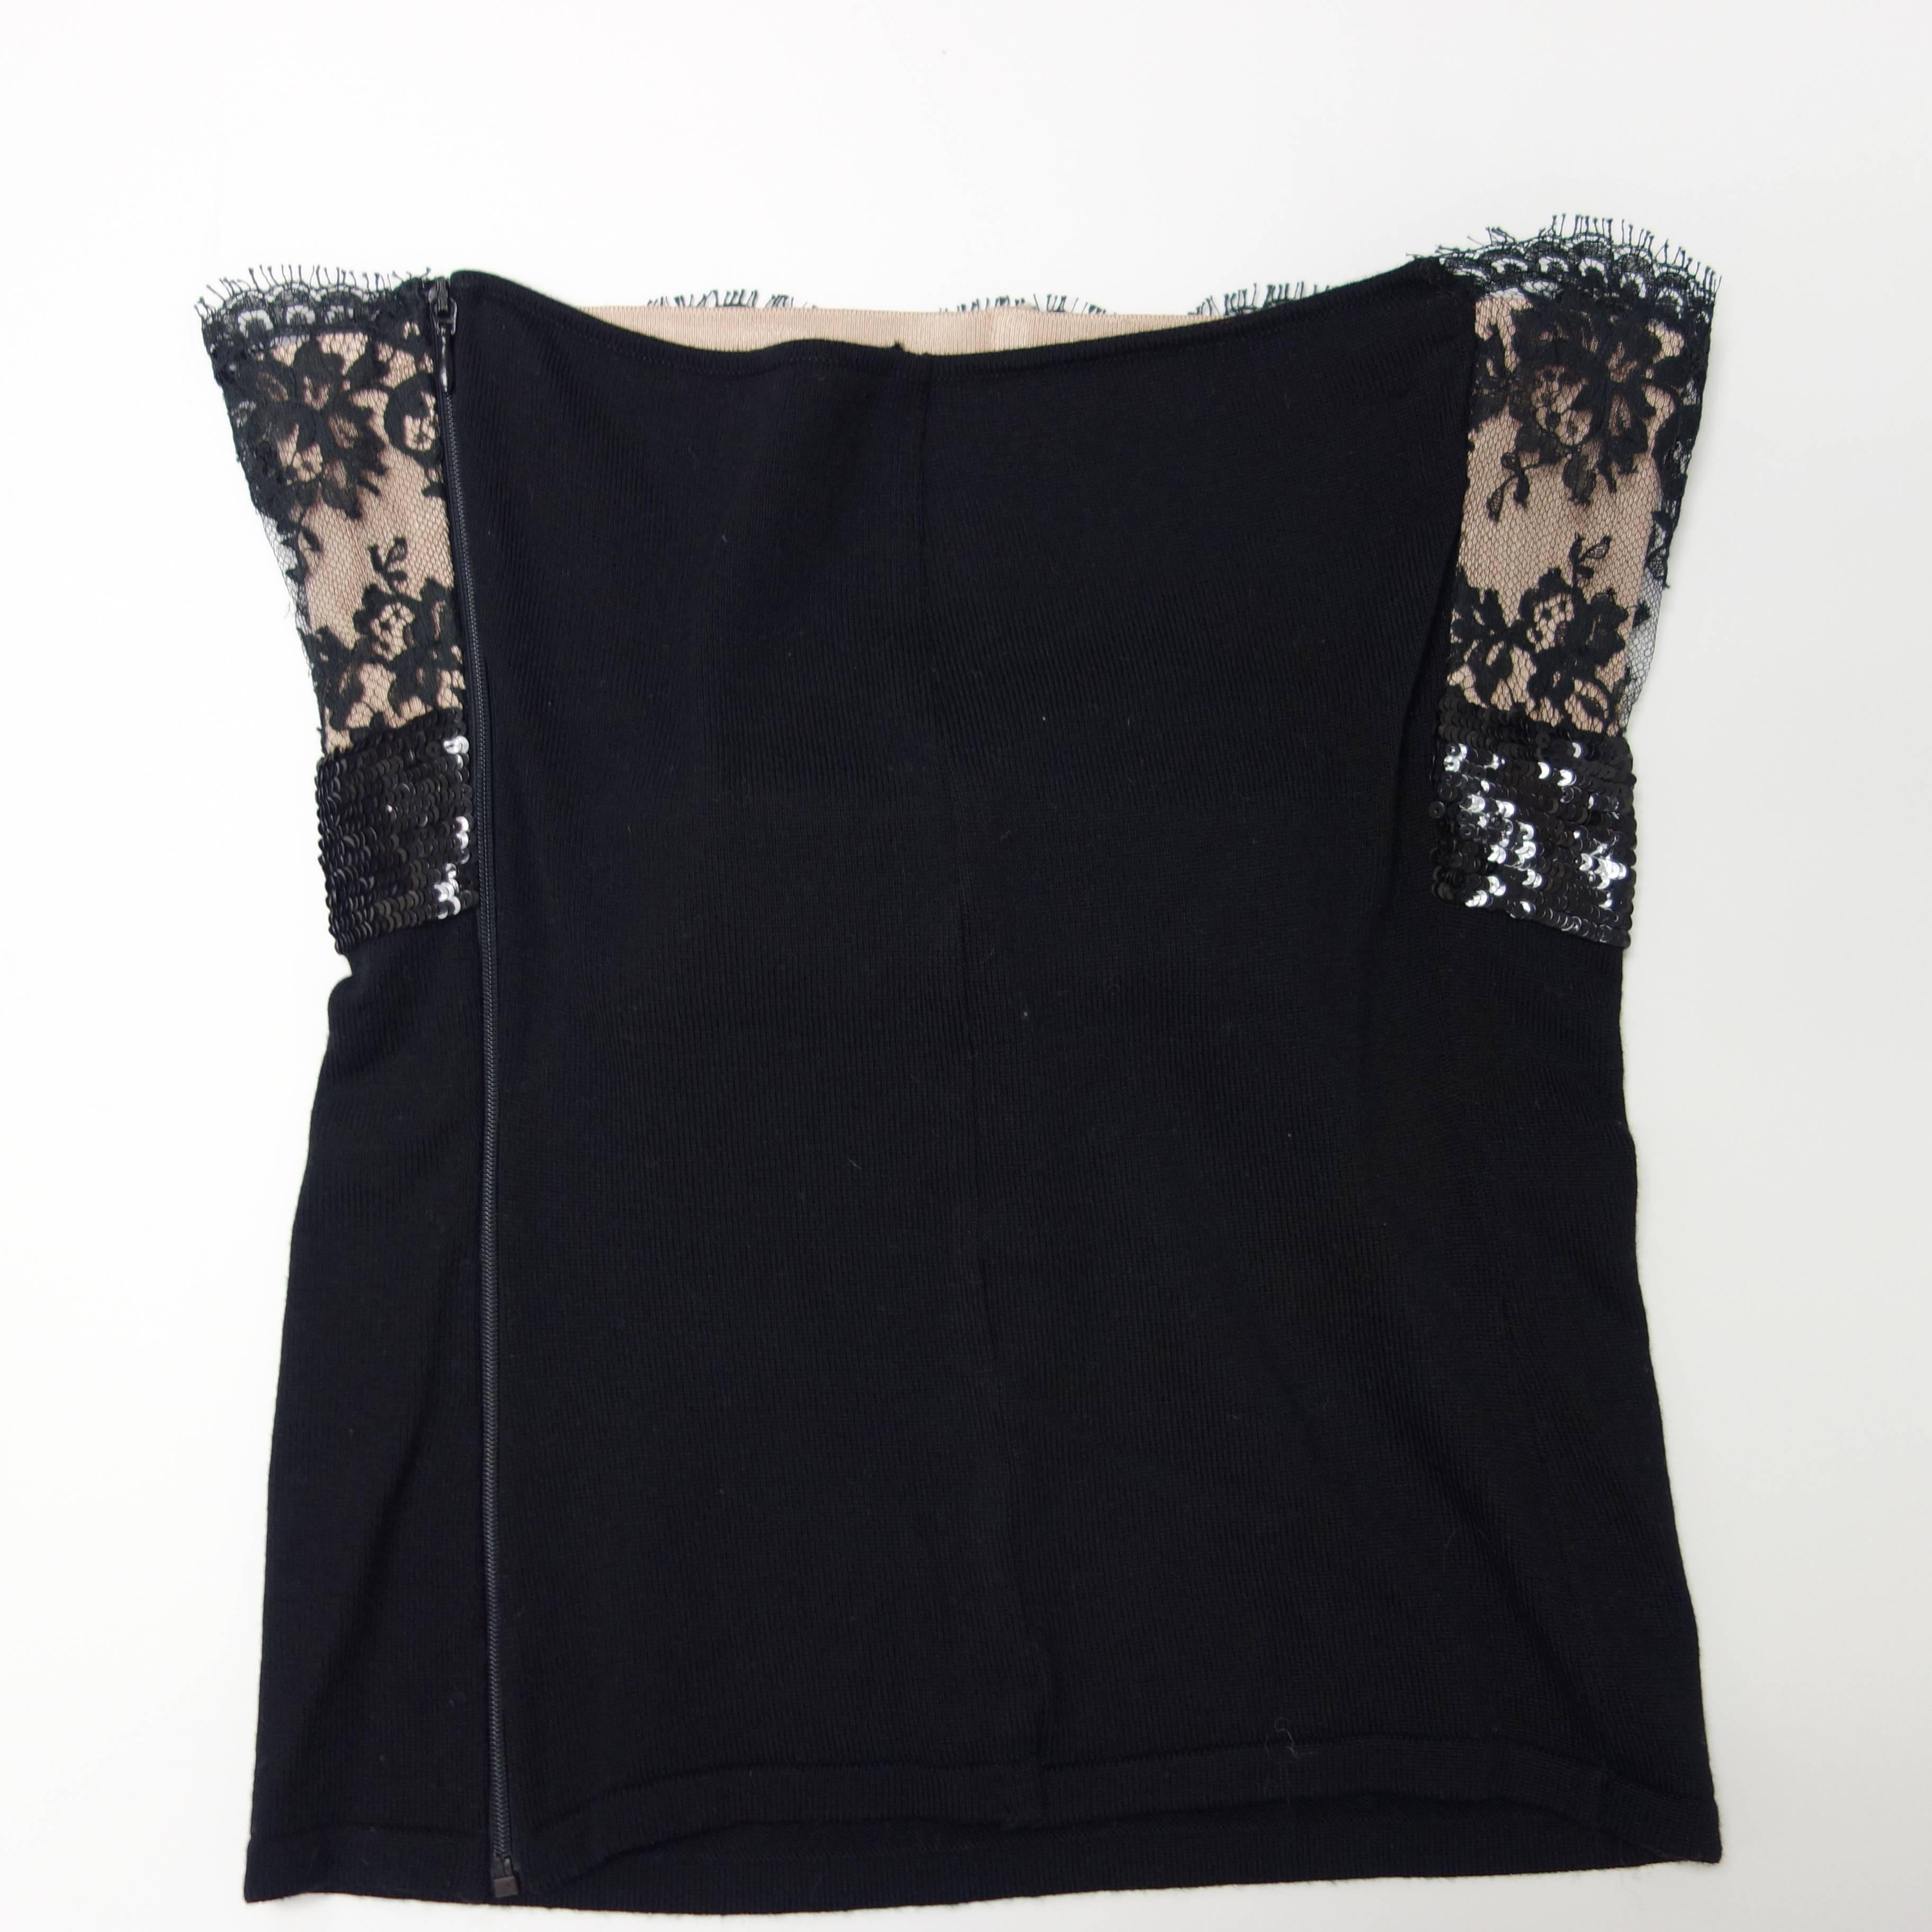 Valentino Strapless Top Exquisite Black Lace Over Nude Sequin Bow Front 1